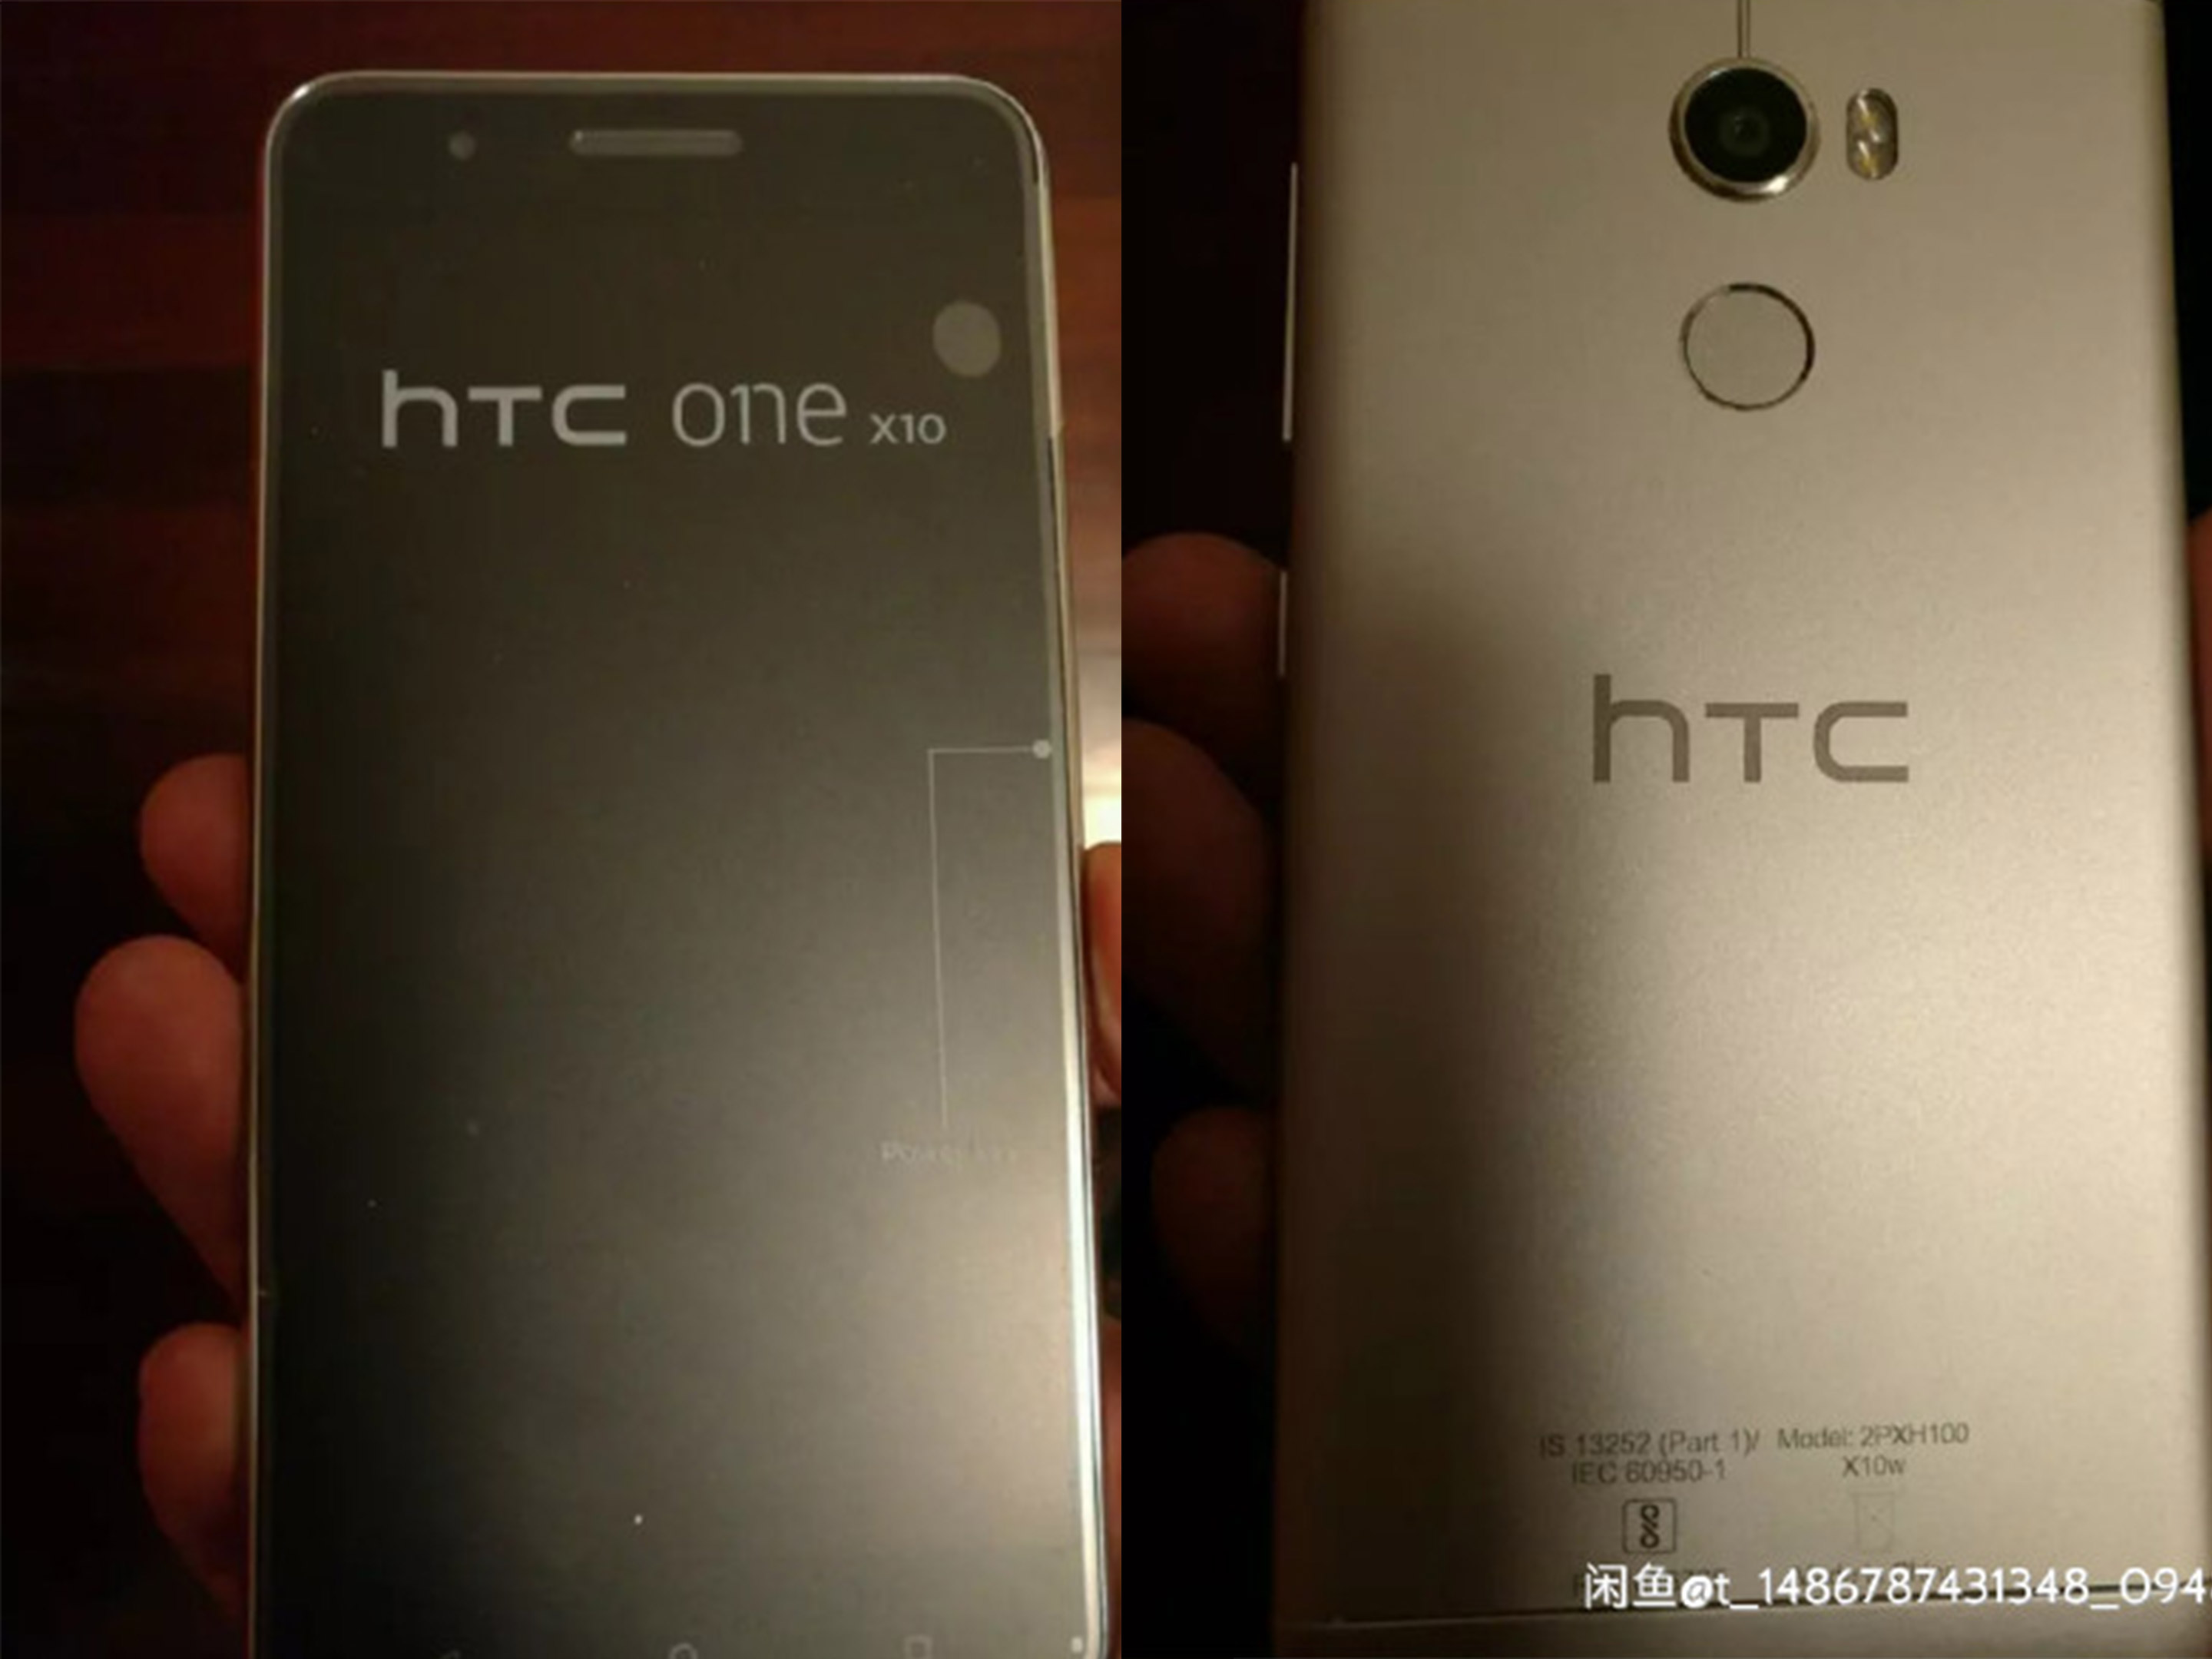 htc one x10 front and back